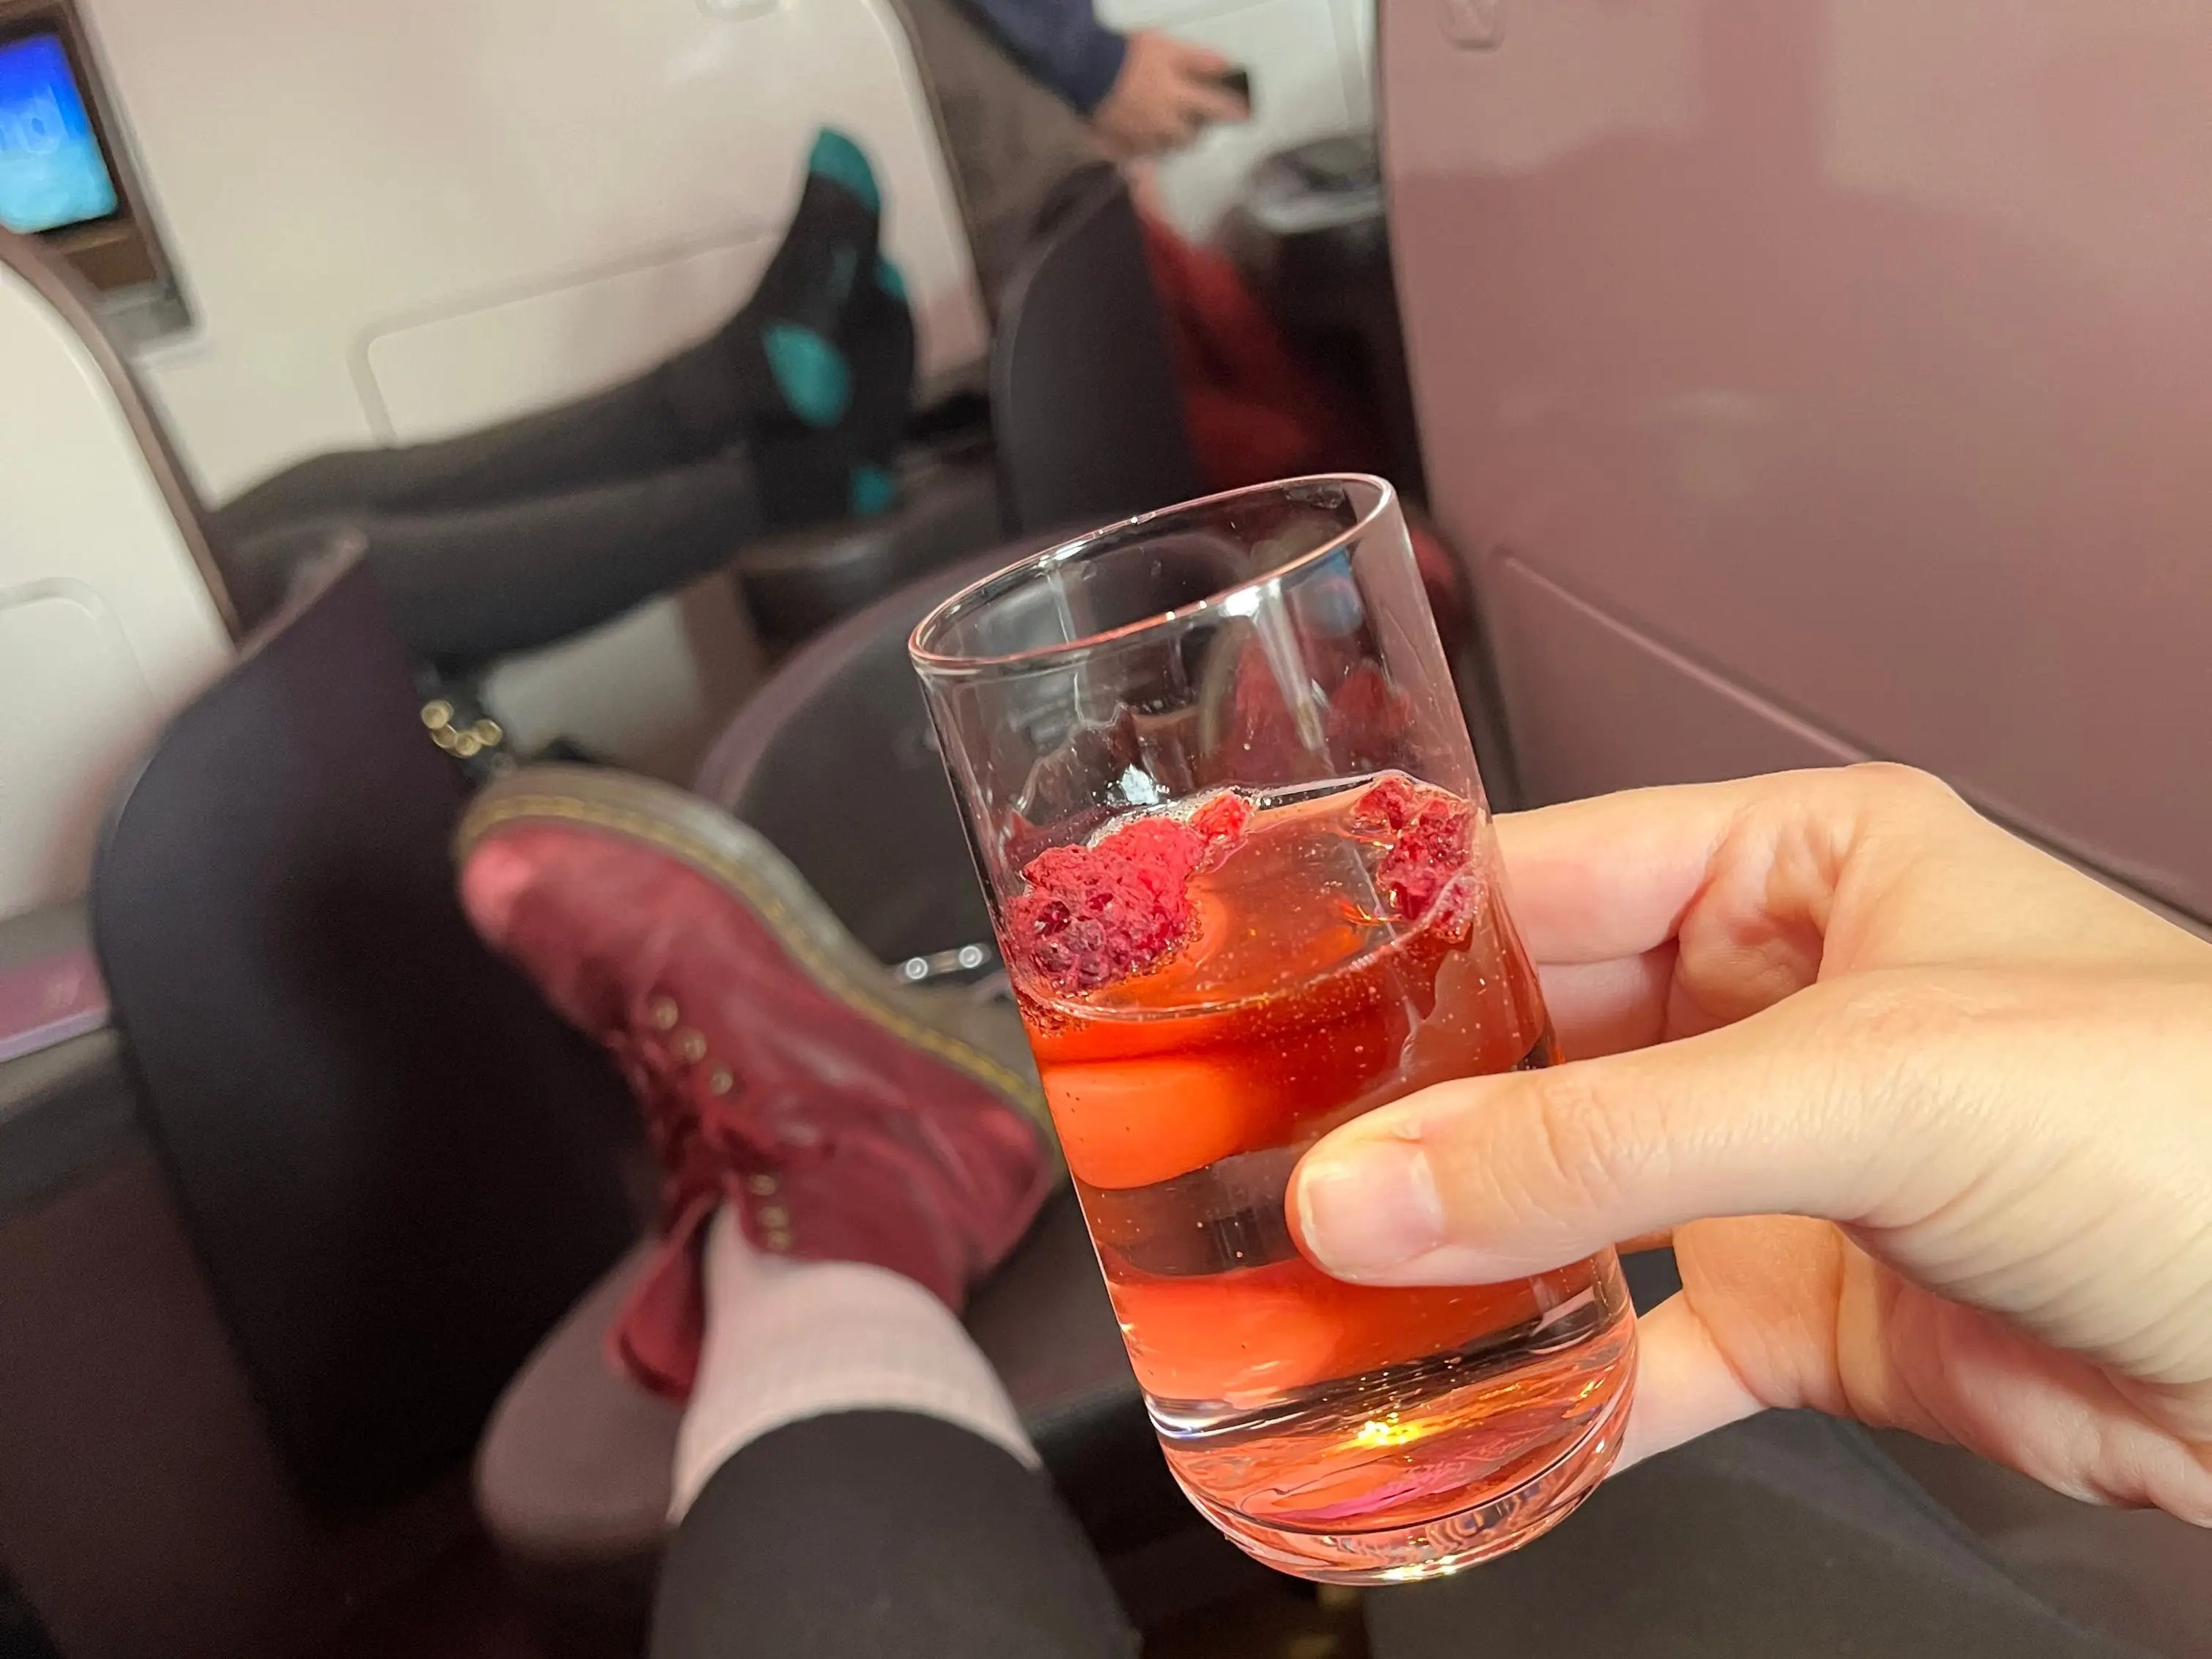 The writer's feet sit on a footrest and point toward other passenger's seats. A hand holds a red-orange cocktail with raspberries floating on top